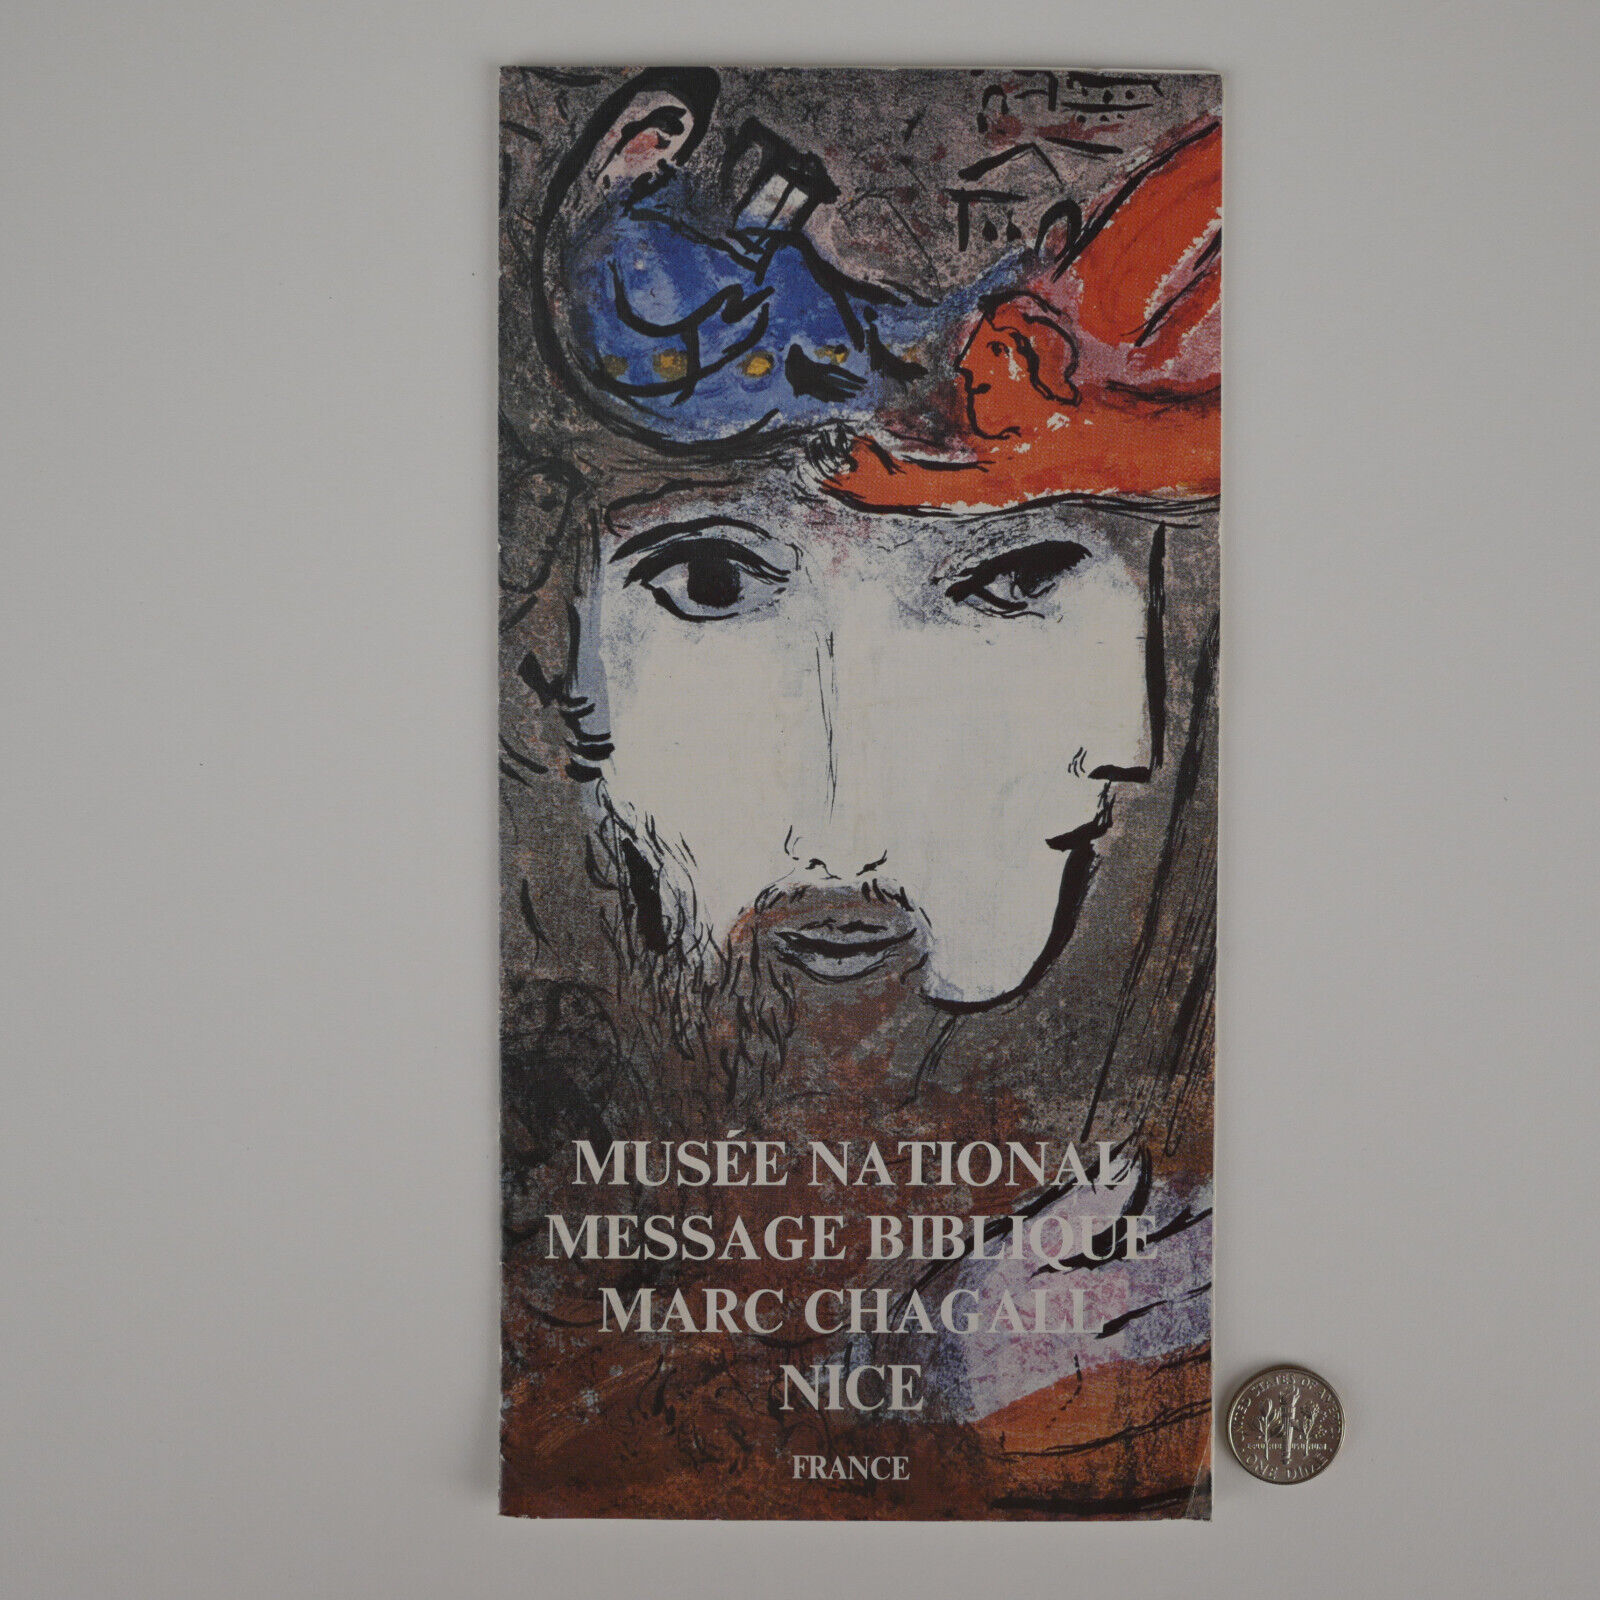 1976 Musée National Message Biblique Marc Chagall, Nice - Museum Pamphlet